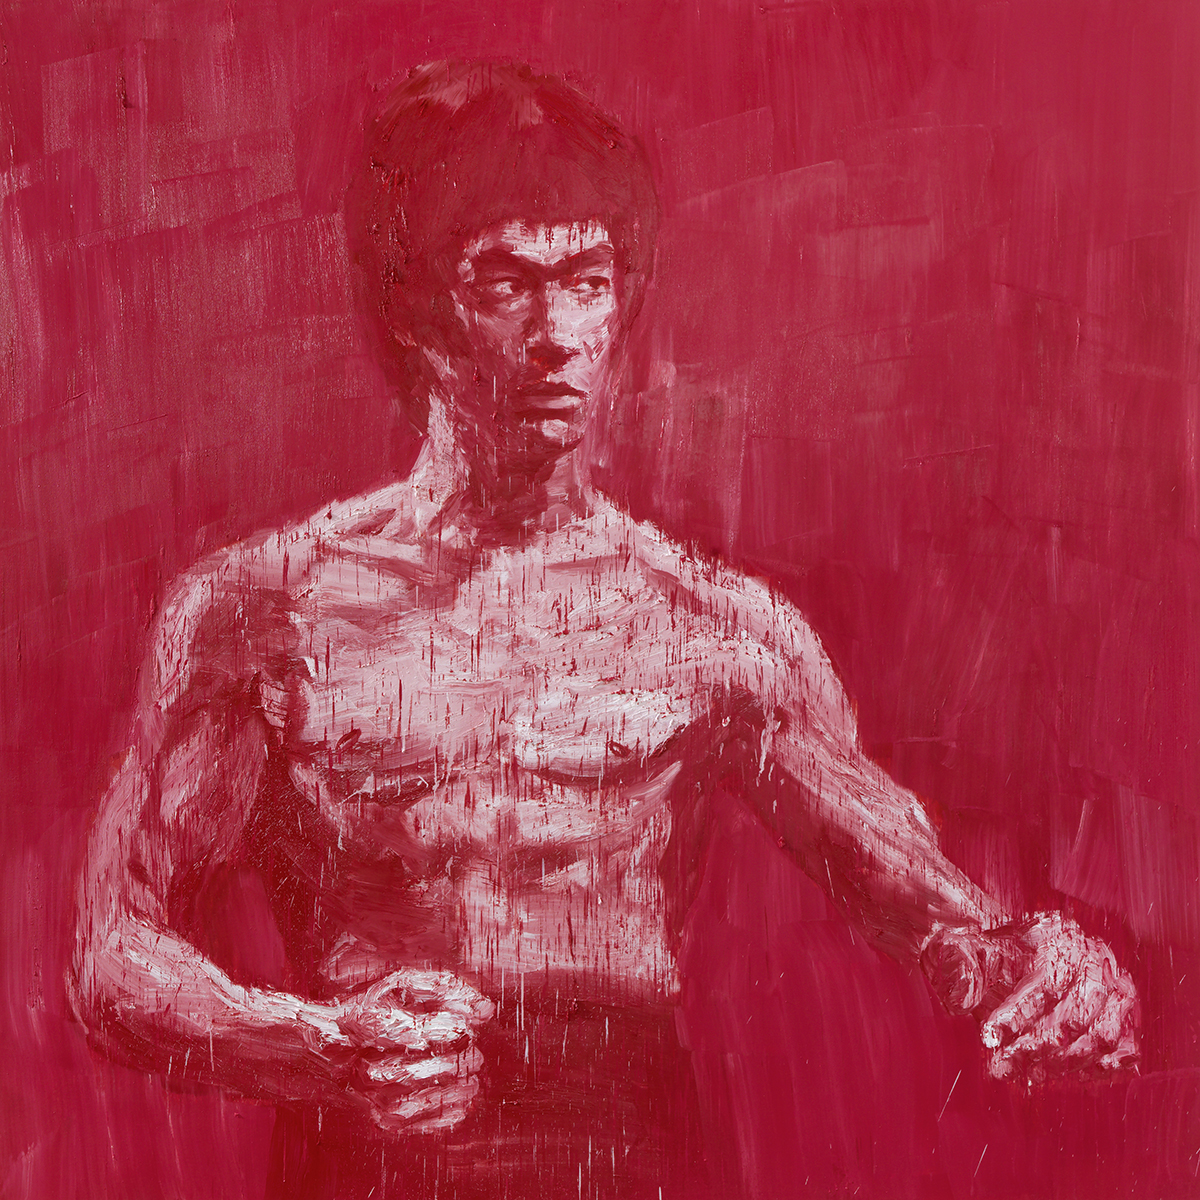 A red painting of a man boxing